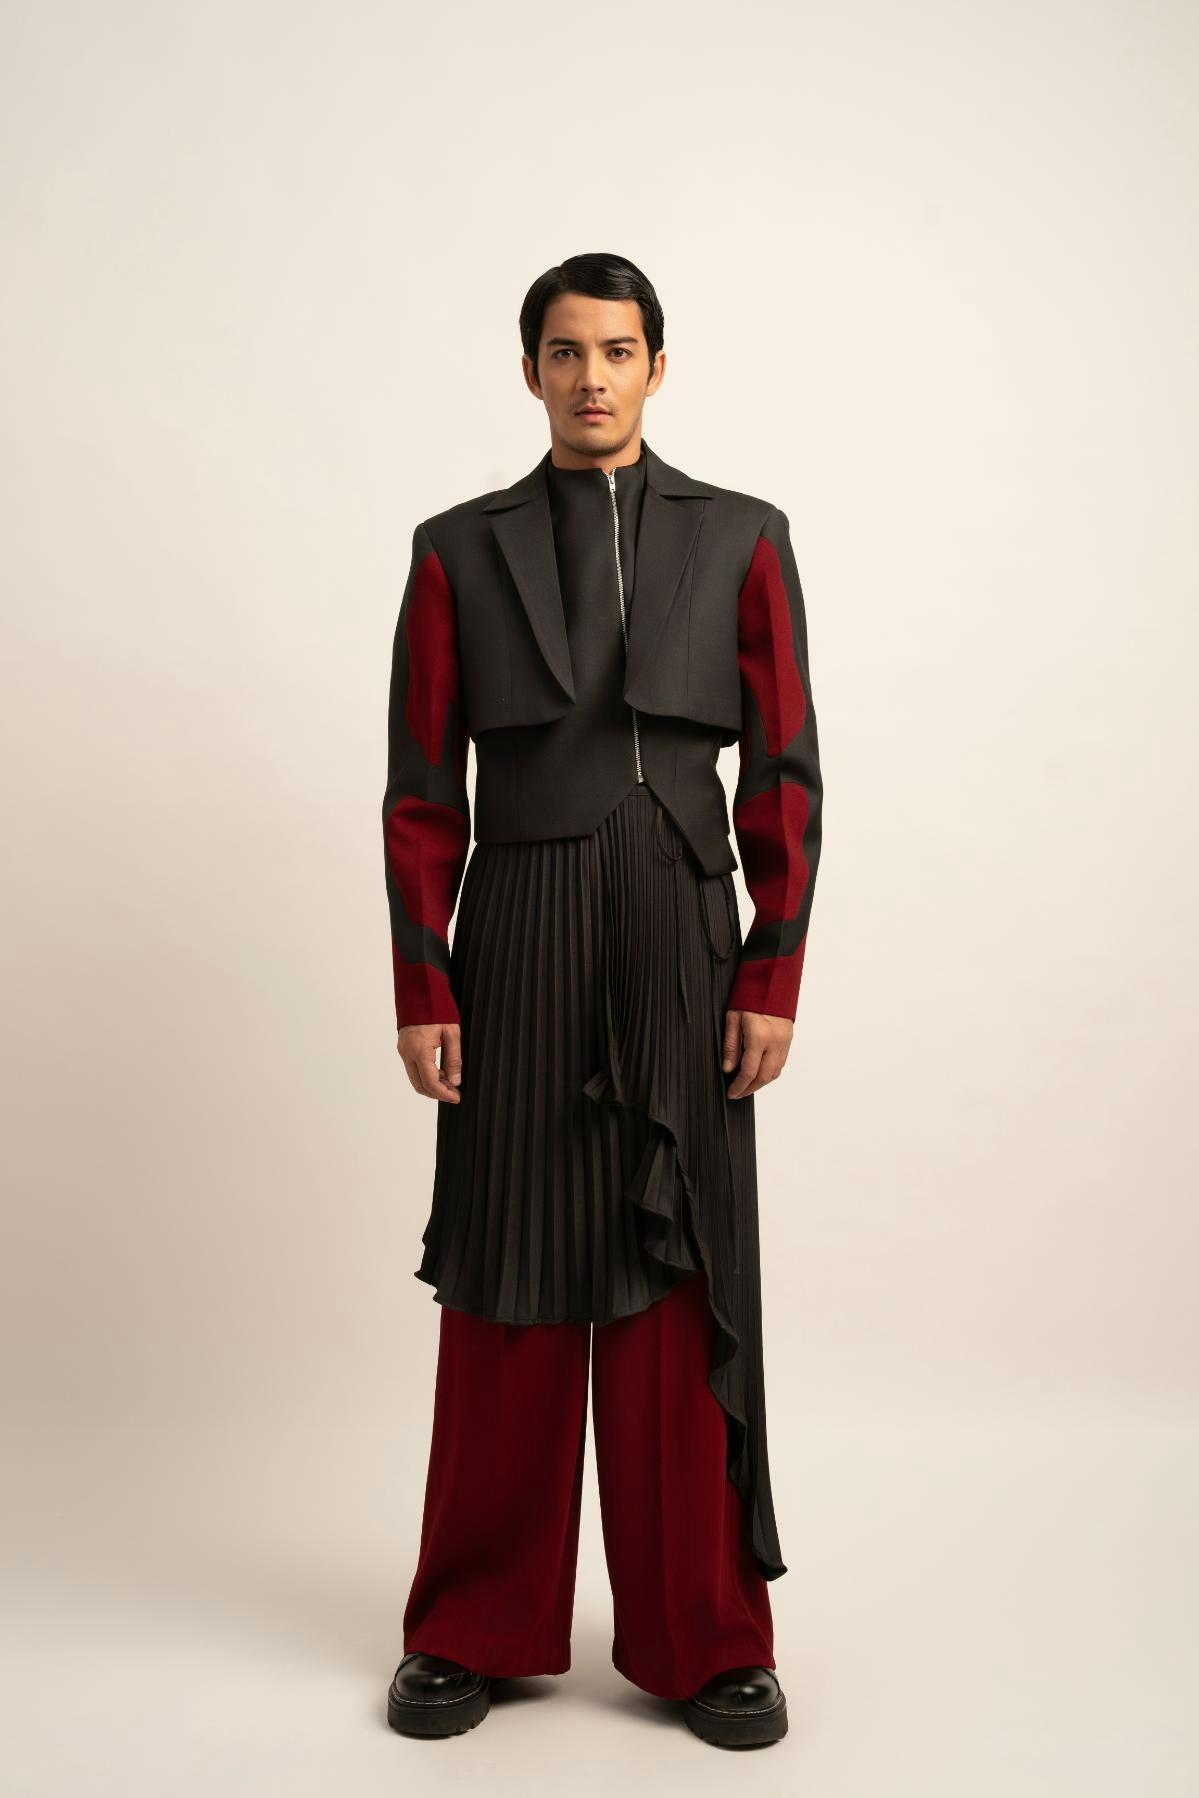 The Seraphic Symphony Trousers Set, a product by Siddhant Agrawal Label